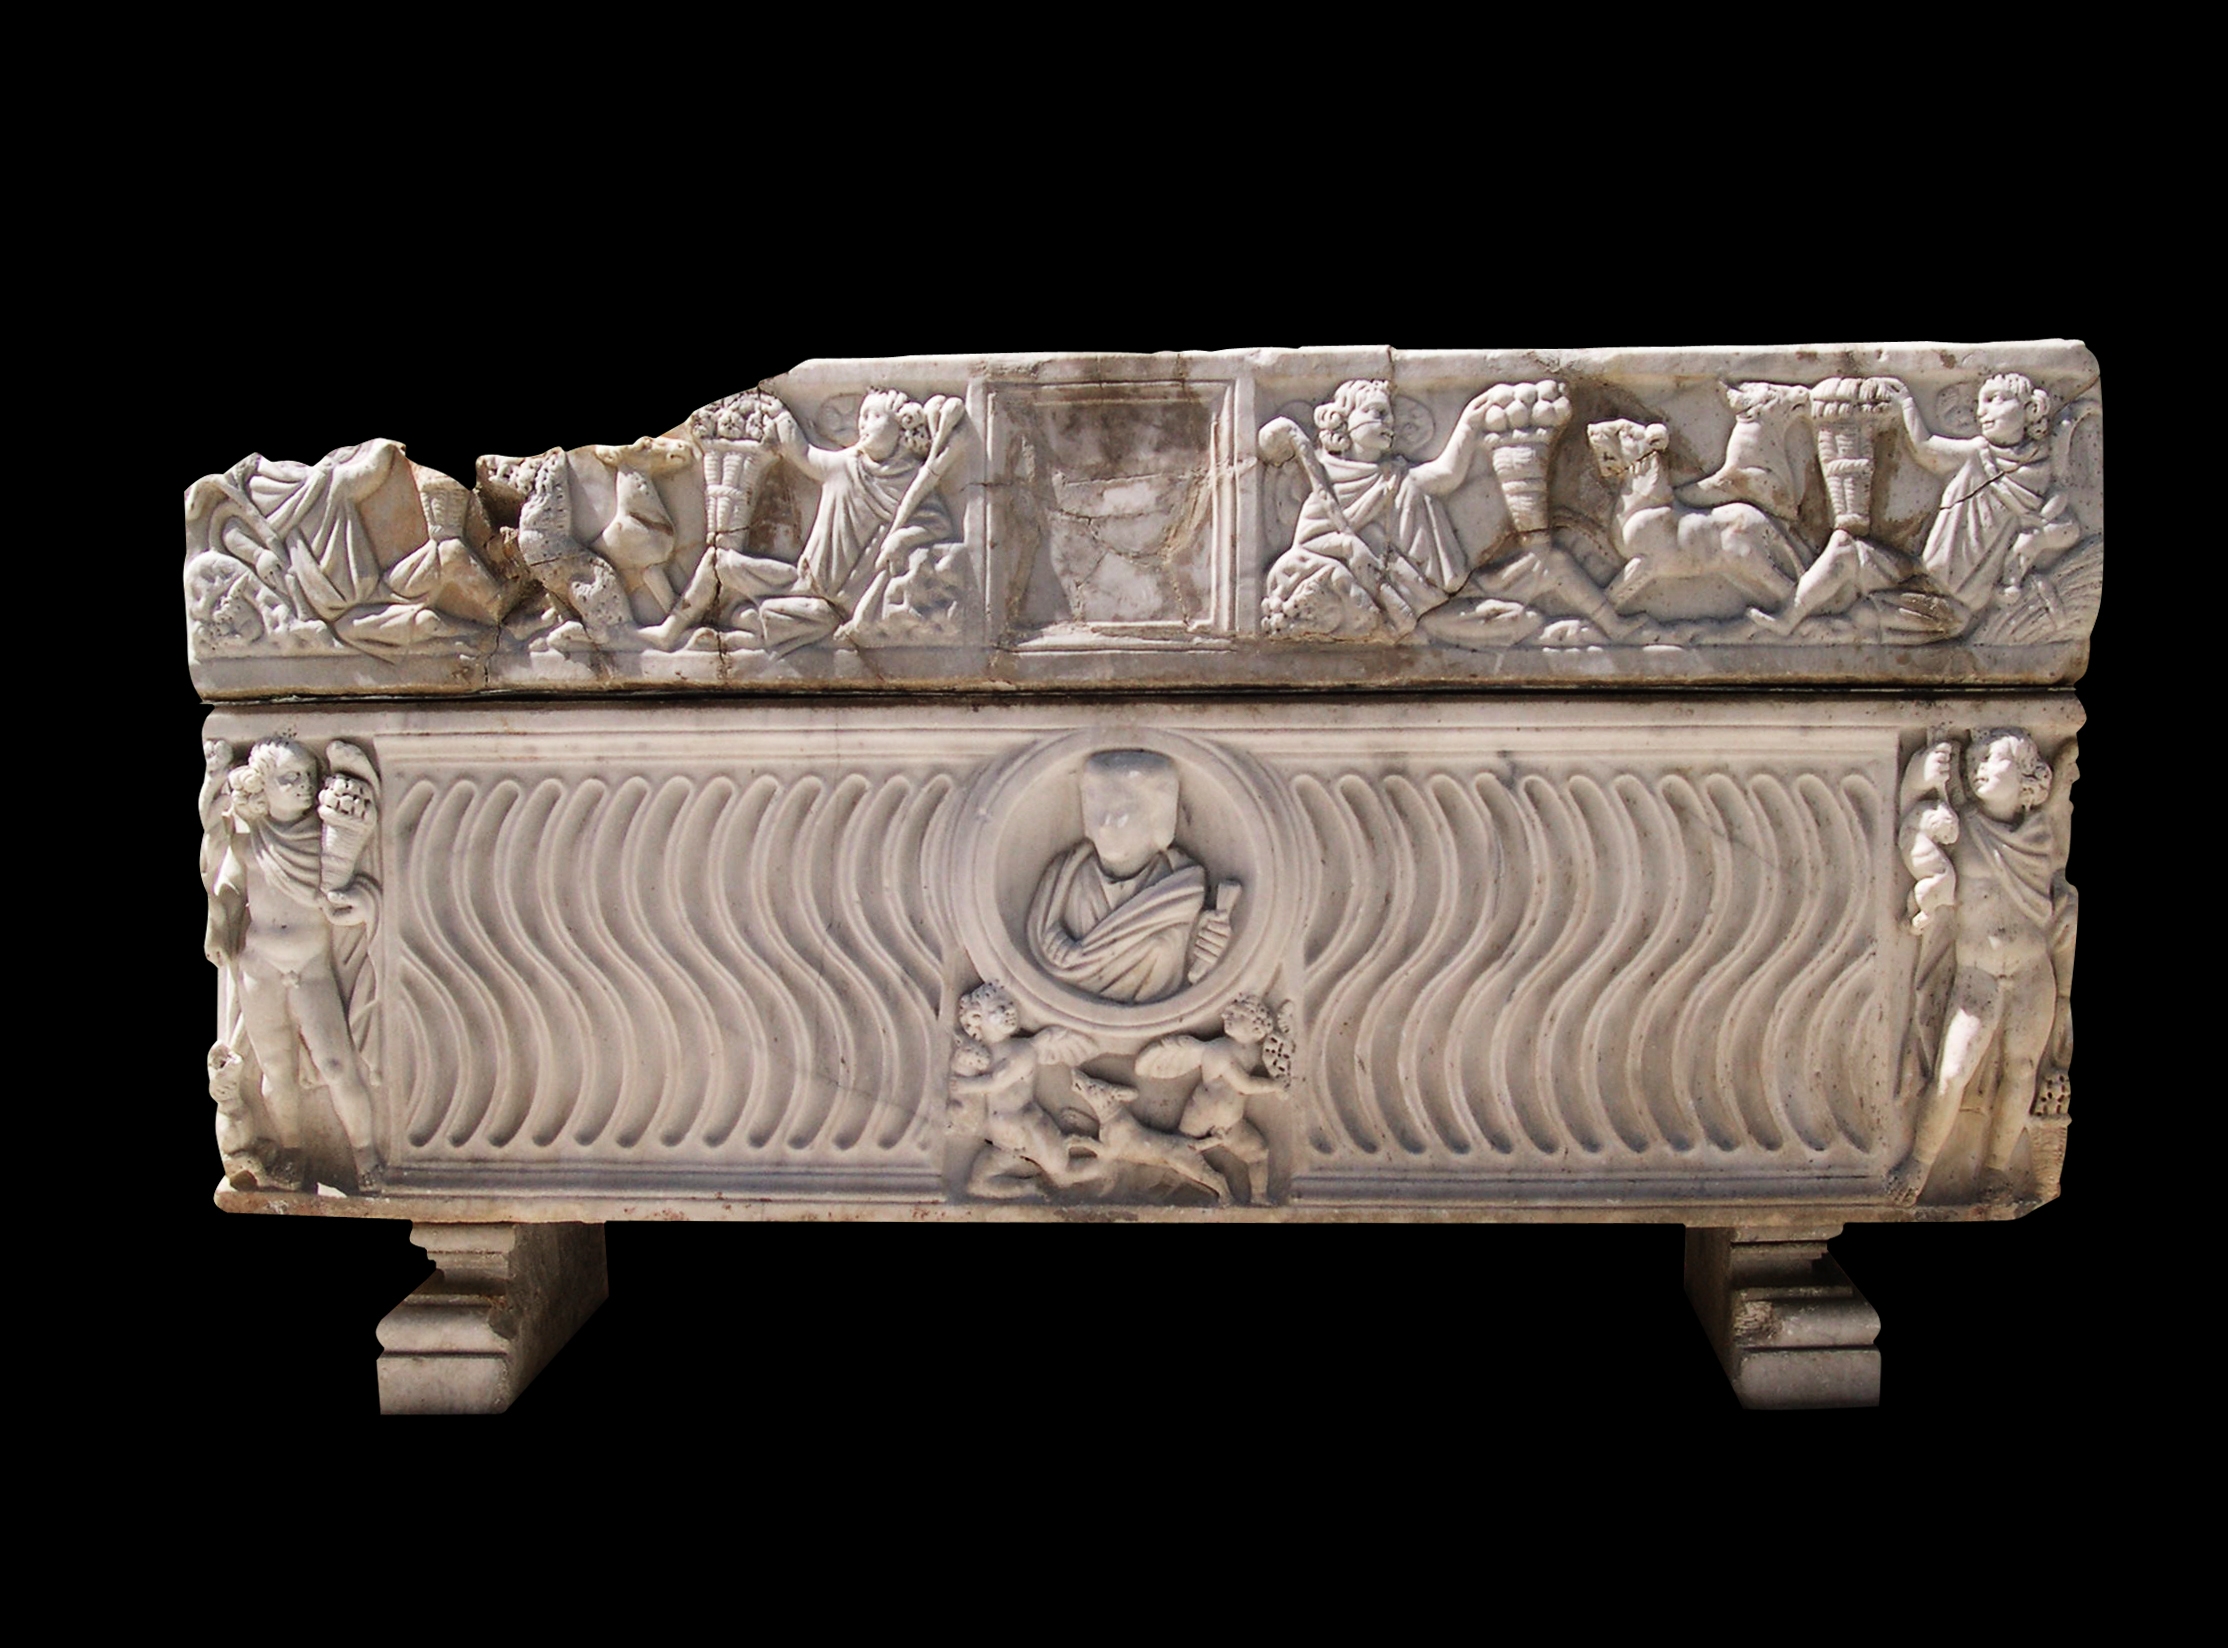 Strigilated sarcophagus with lid decorated by genii of the seasons